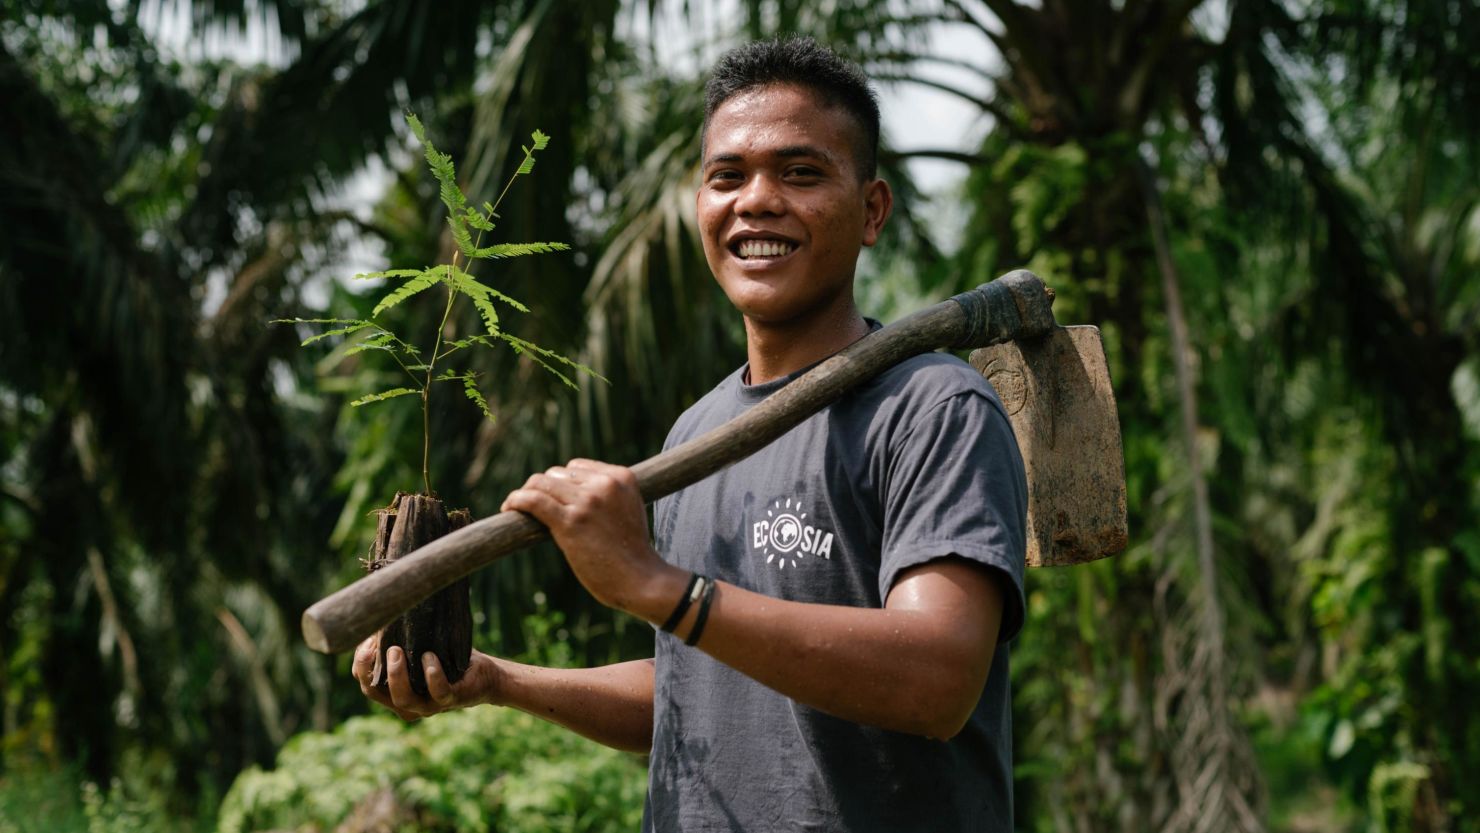 A tree planter working in association with Ecosia in Indonesia.